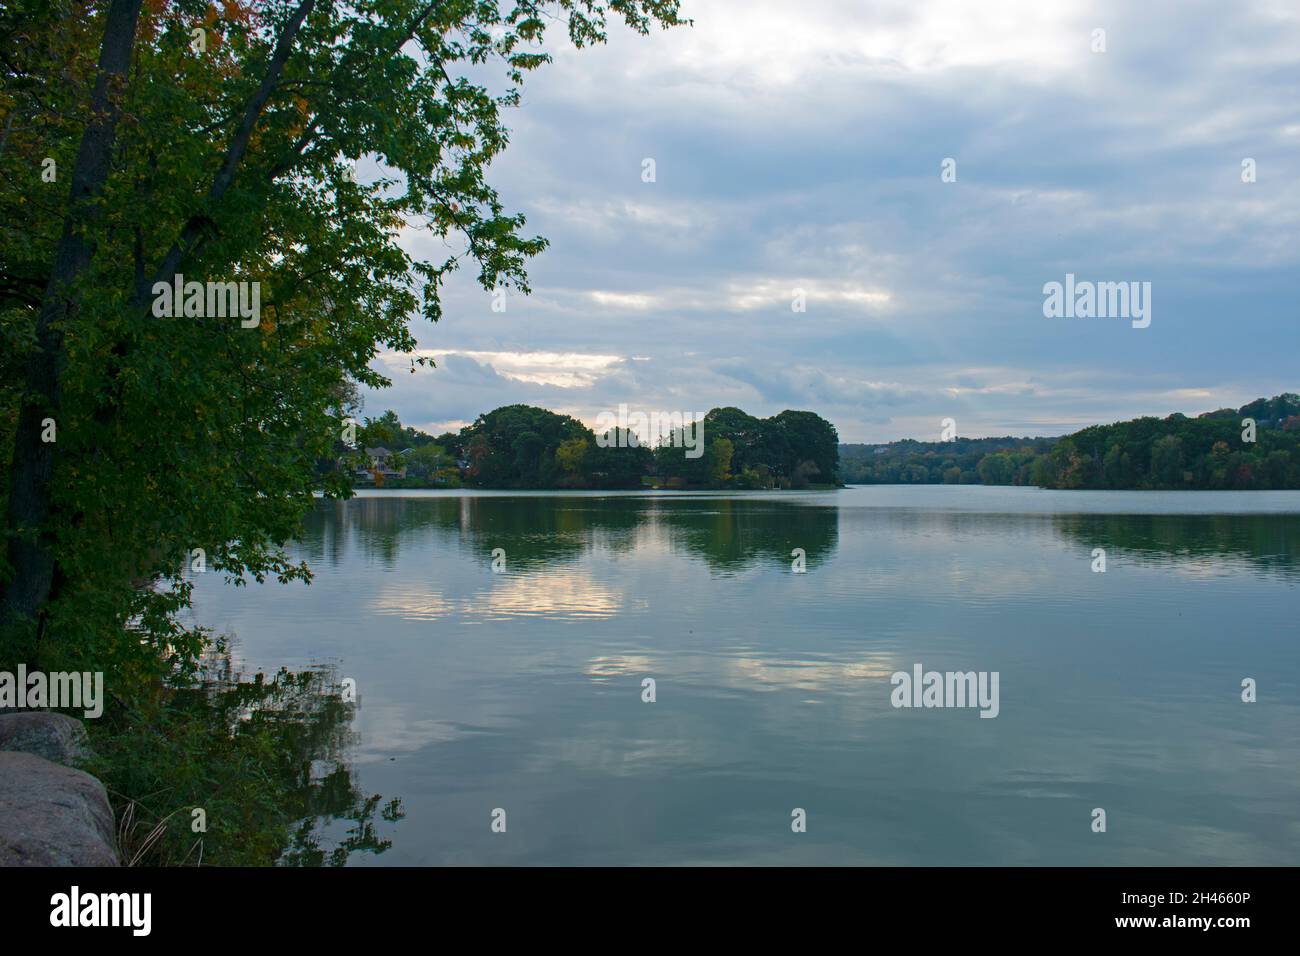 Clouds and trees reflecting on the still waters of Spy Pond, in Arlington, Massachusetts, on a cloudy autumn day -01 Stock Photo